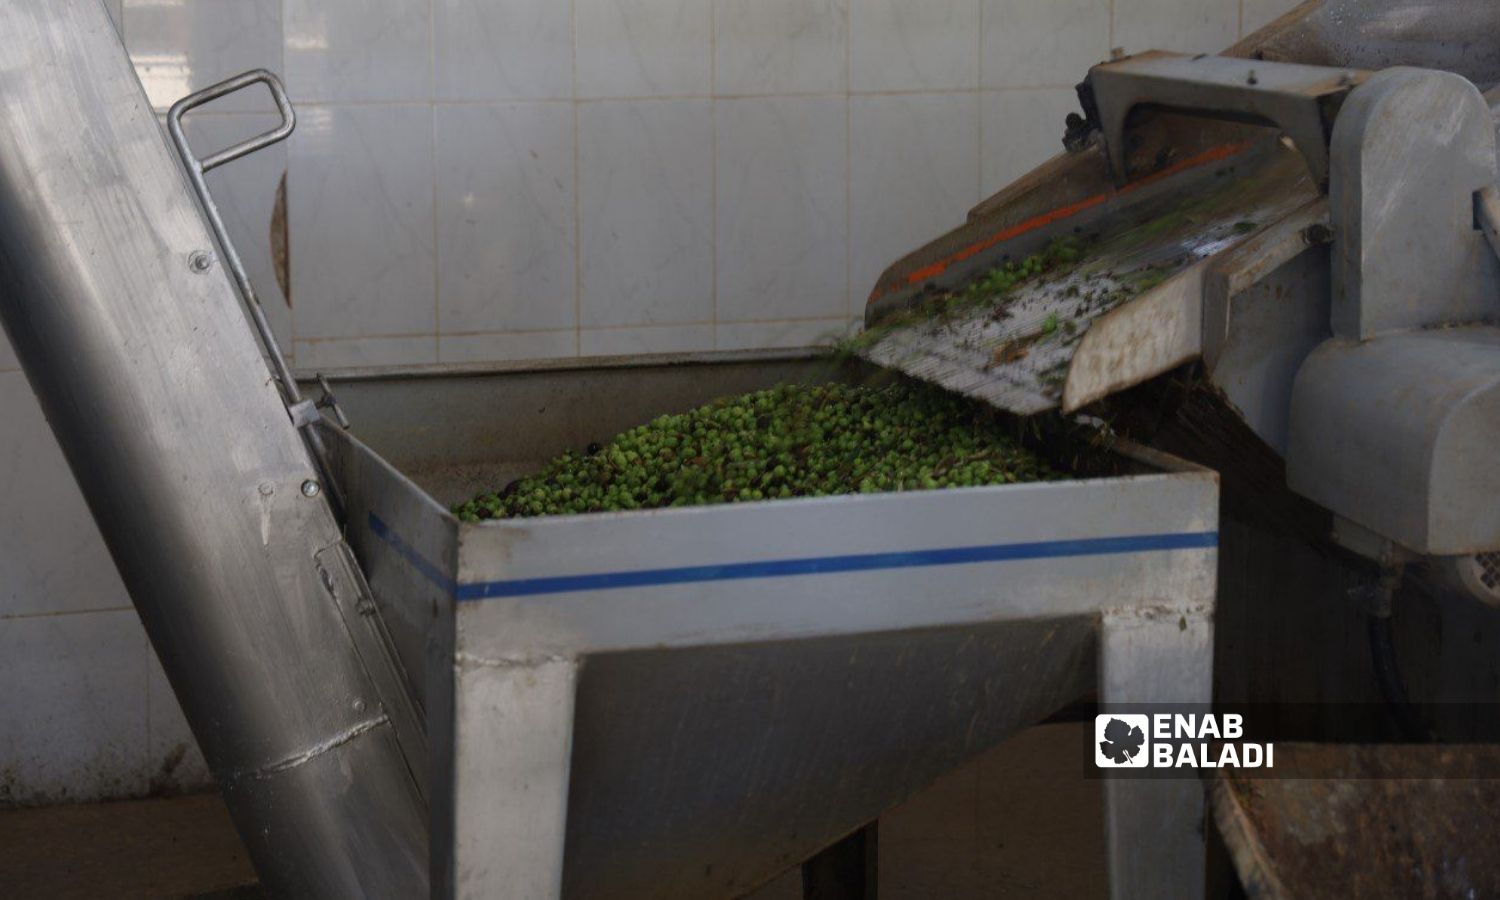 Olive pressing in the city of Afrin, north of Aleppo - 18 October 2022 (Enab Baladi / Amir Kharboutli)